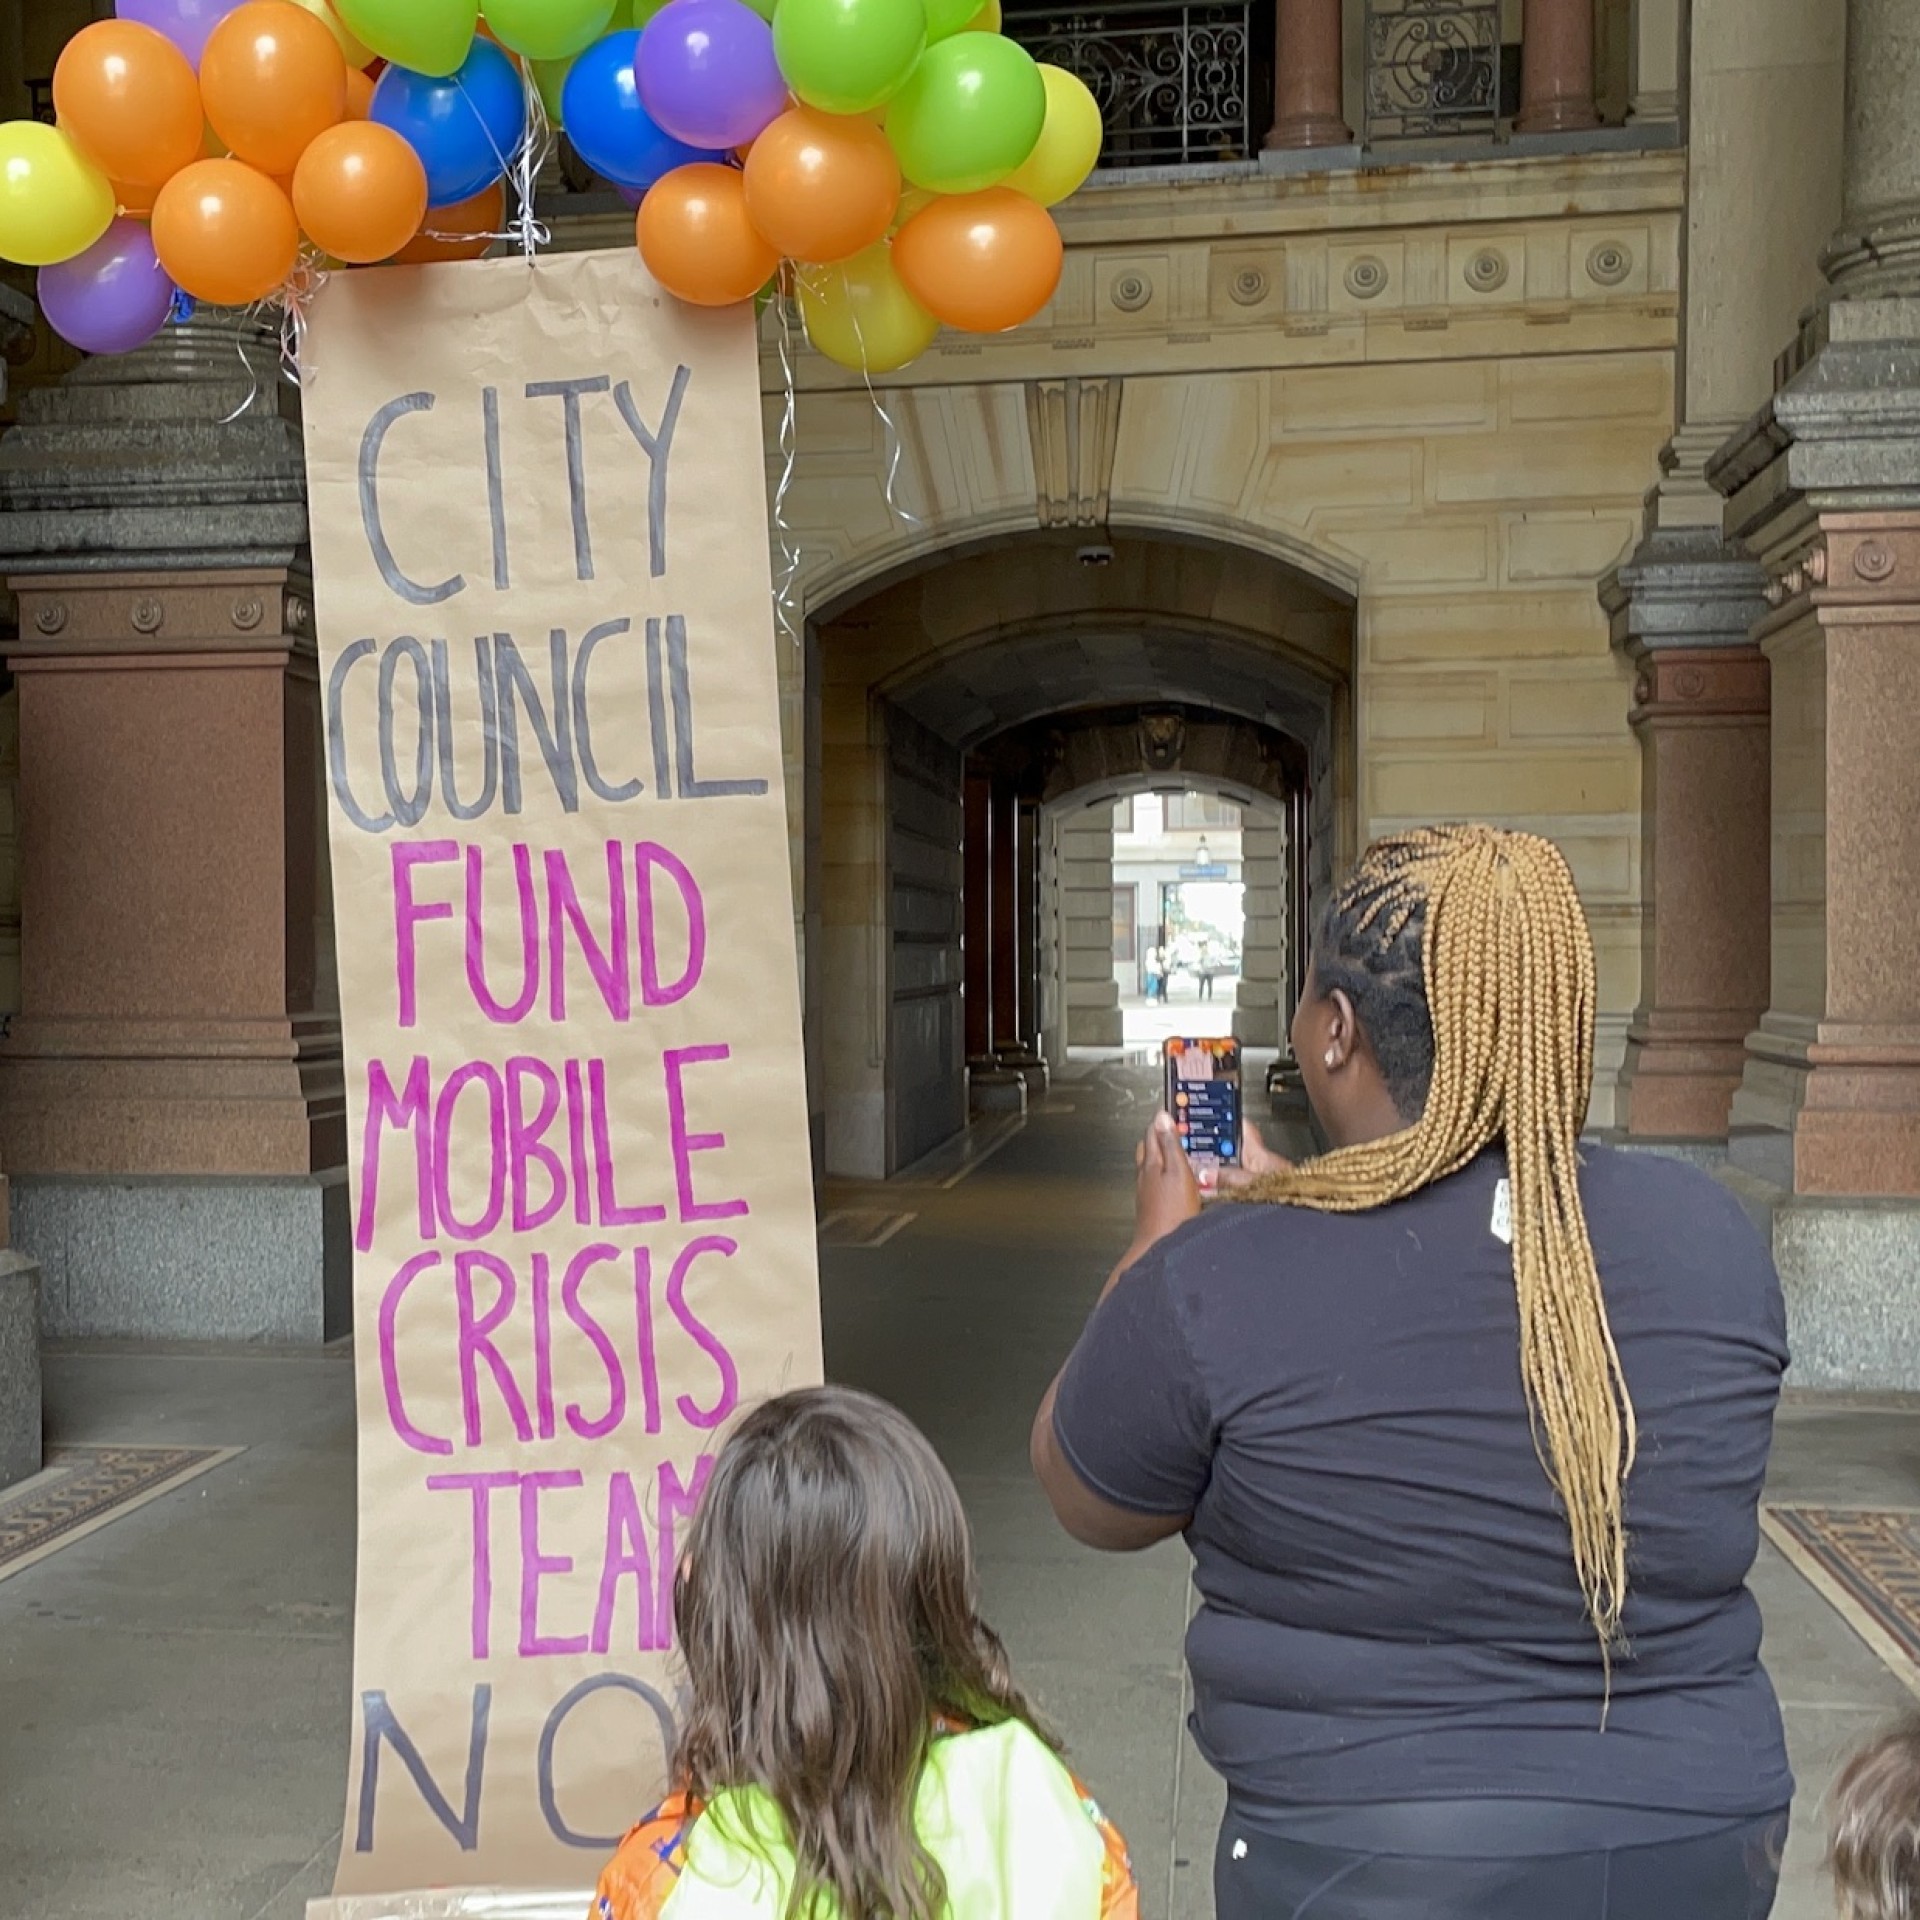 an image shows a balloon banner that reads 'city council fund mobile crisis teams;